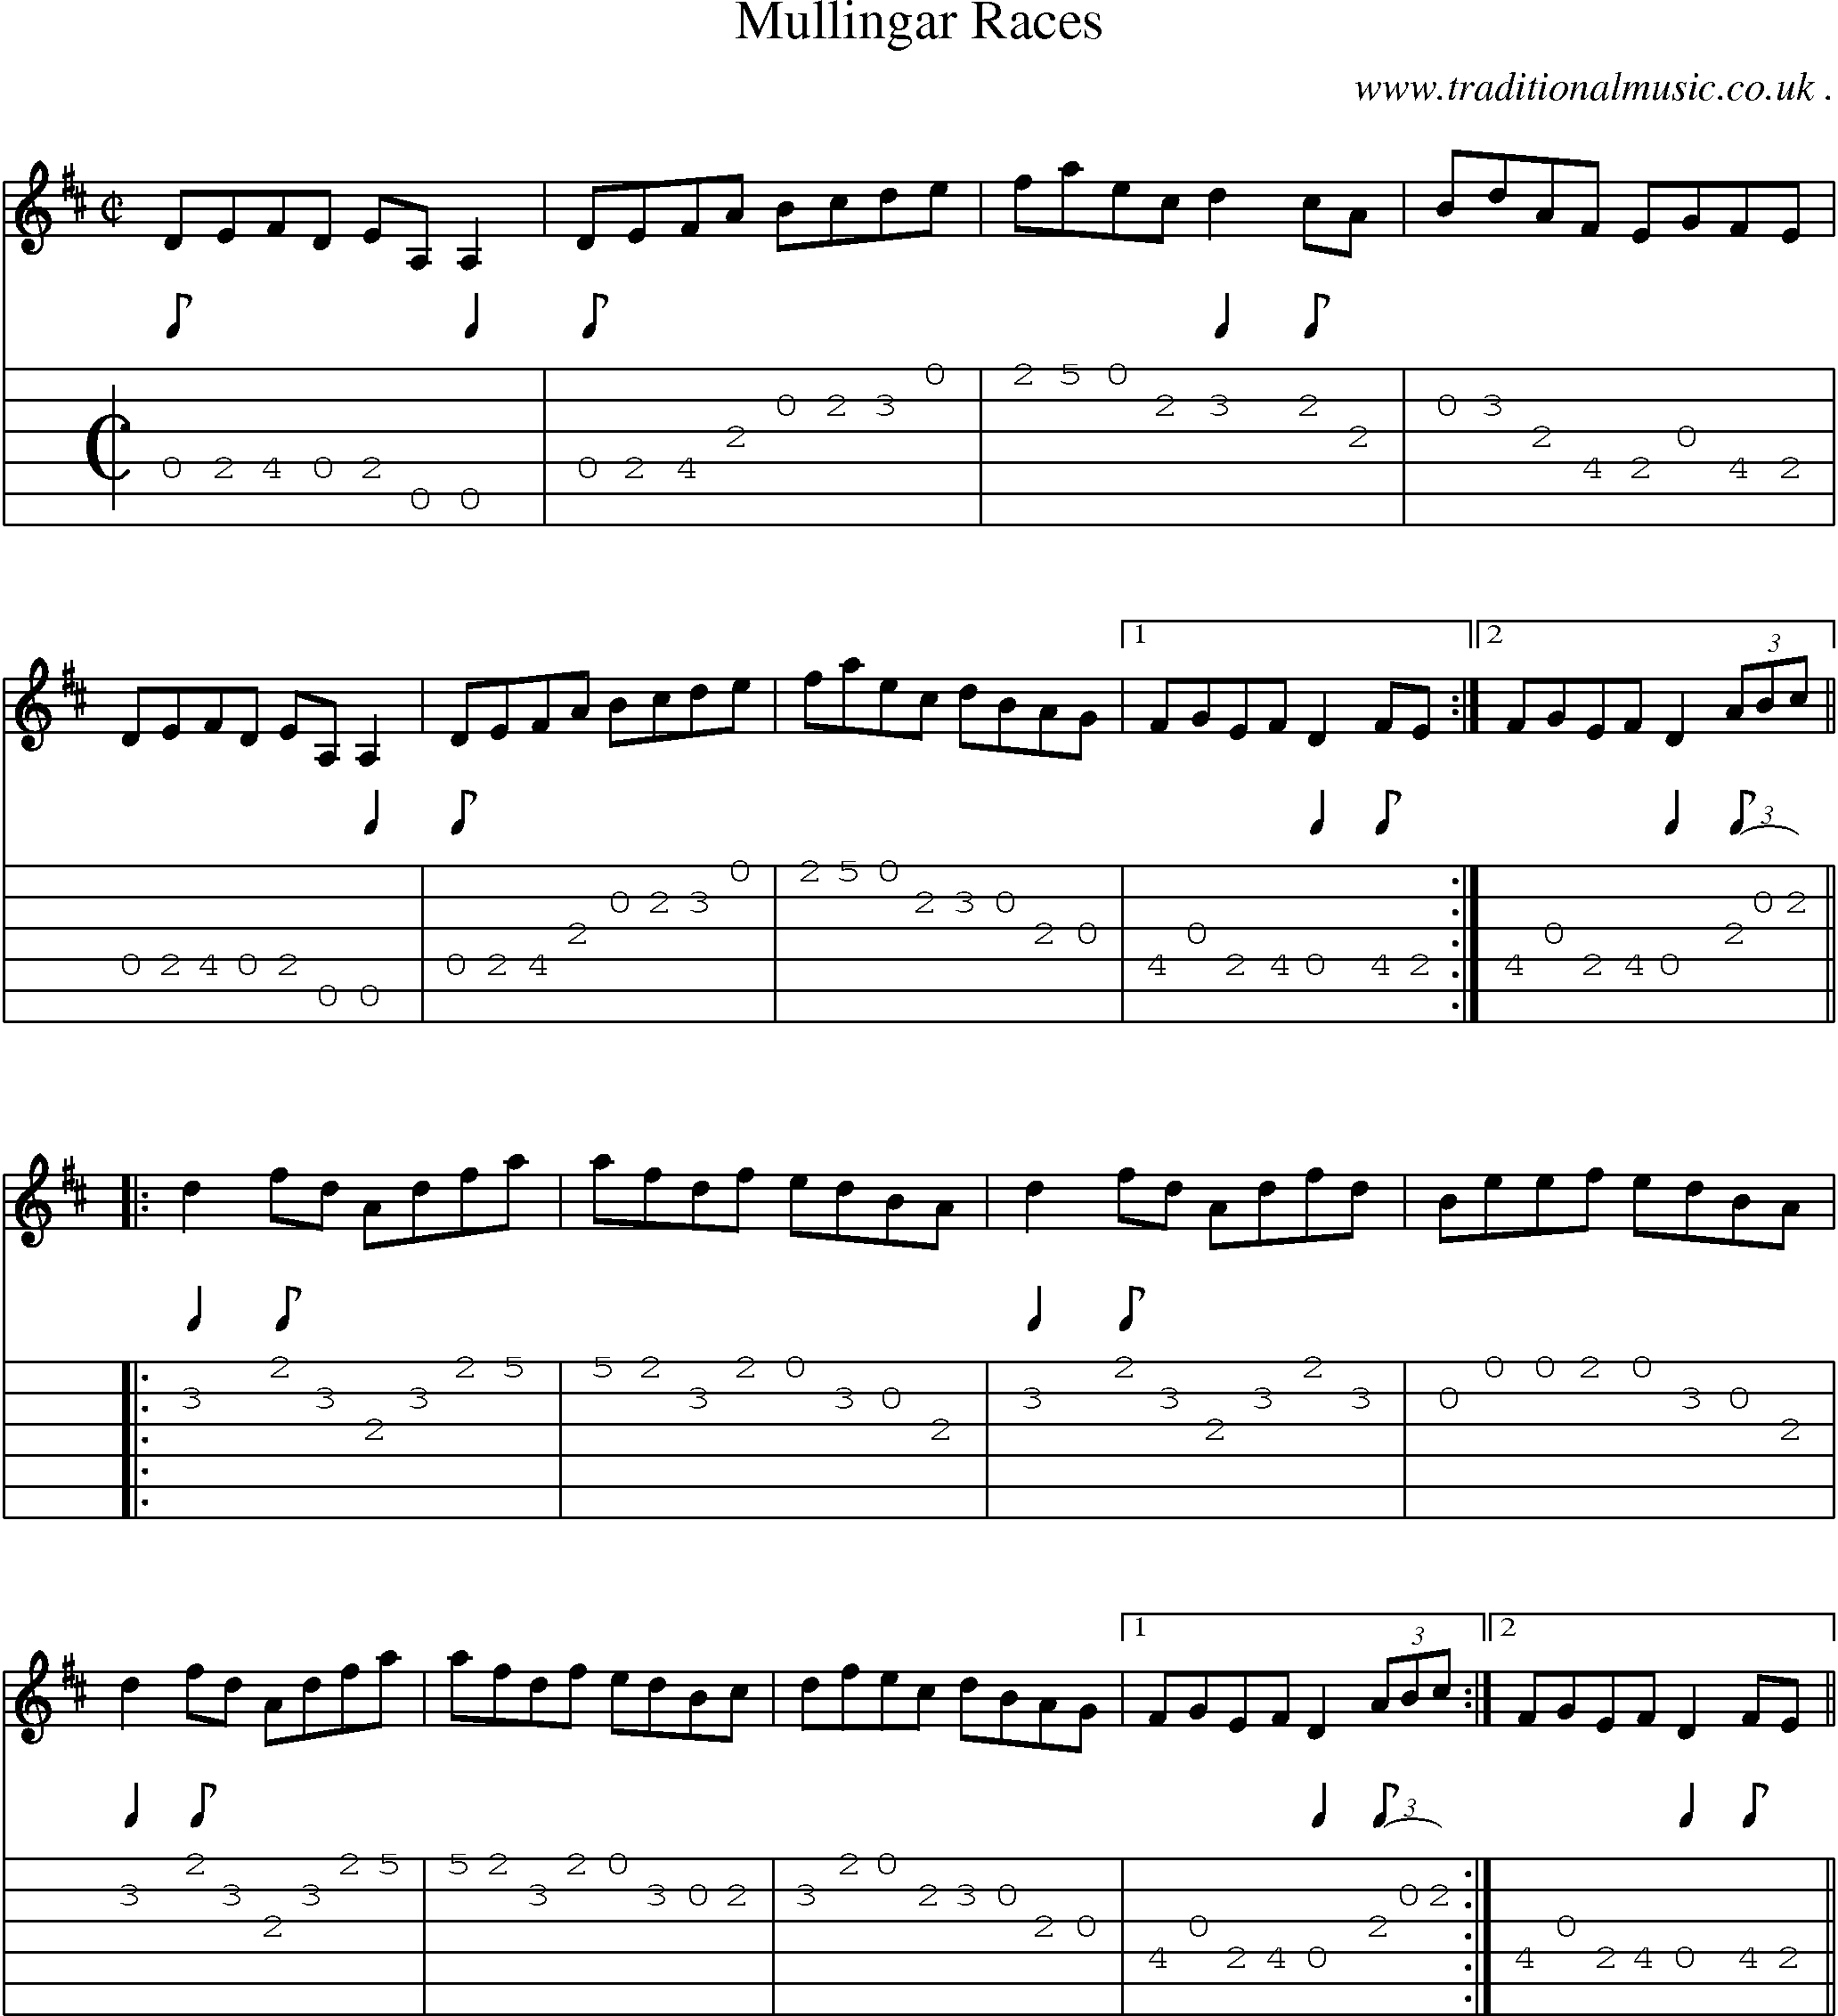 Sheet-Music and Guitar Tabs for Mullingar Races